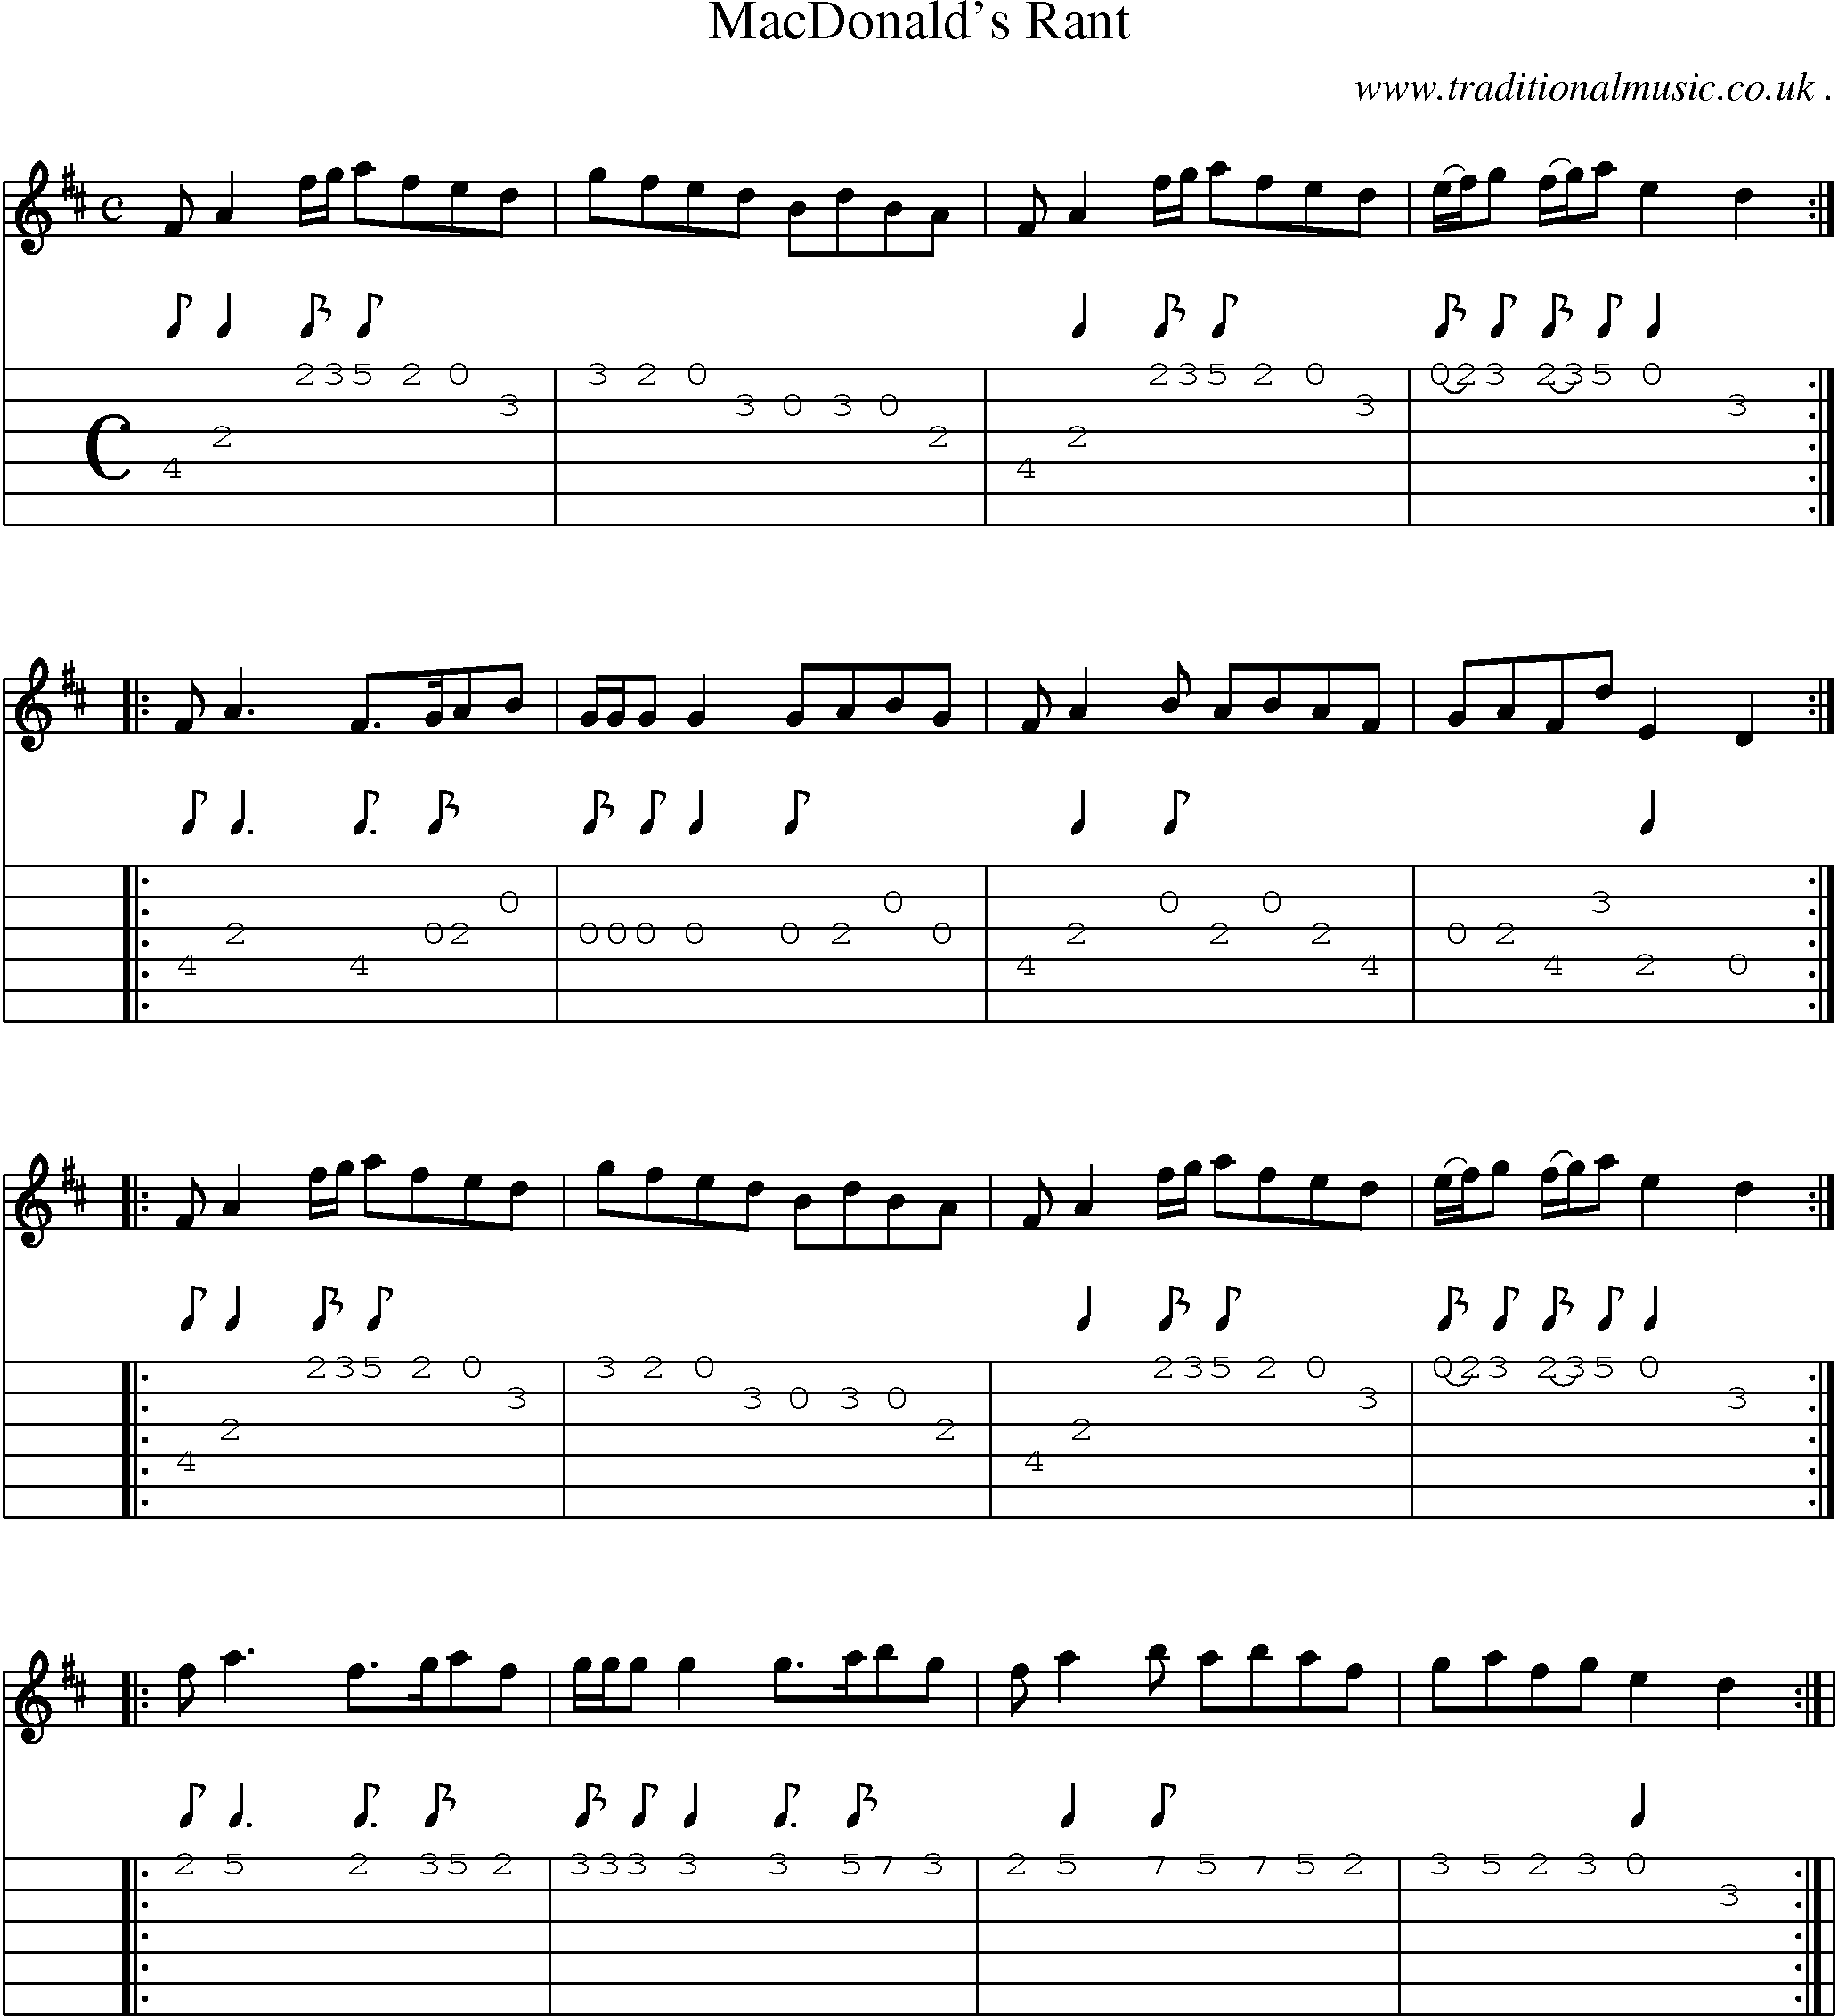 Sheet-Music and Guitar Tabs for Macdonalds Rant